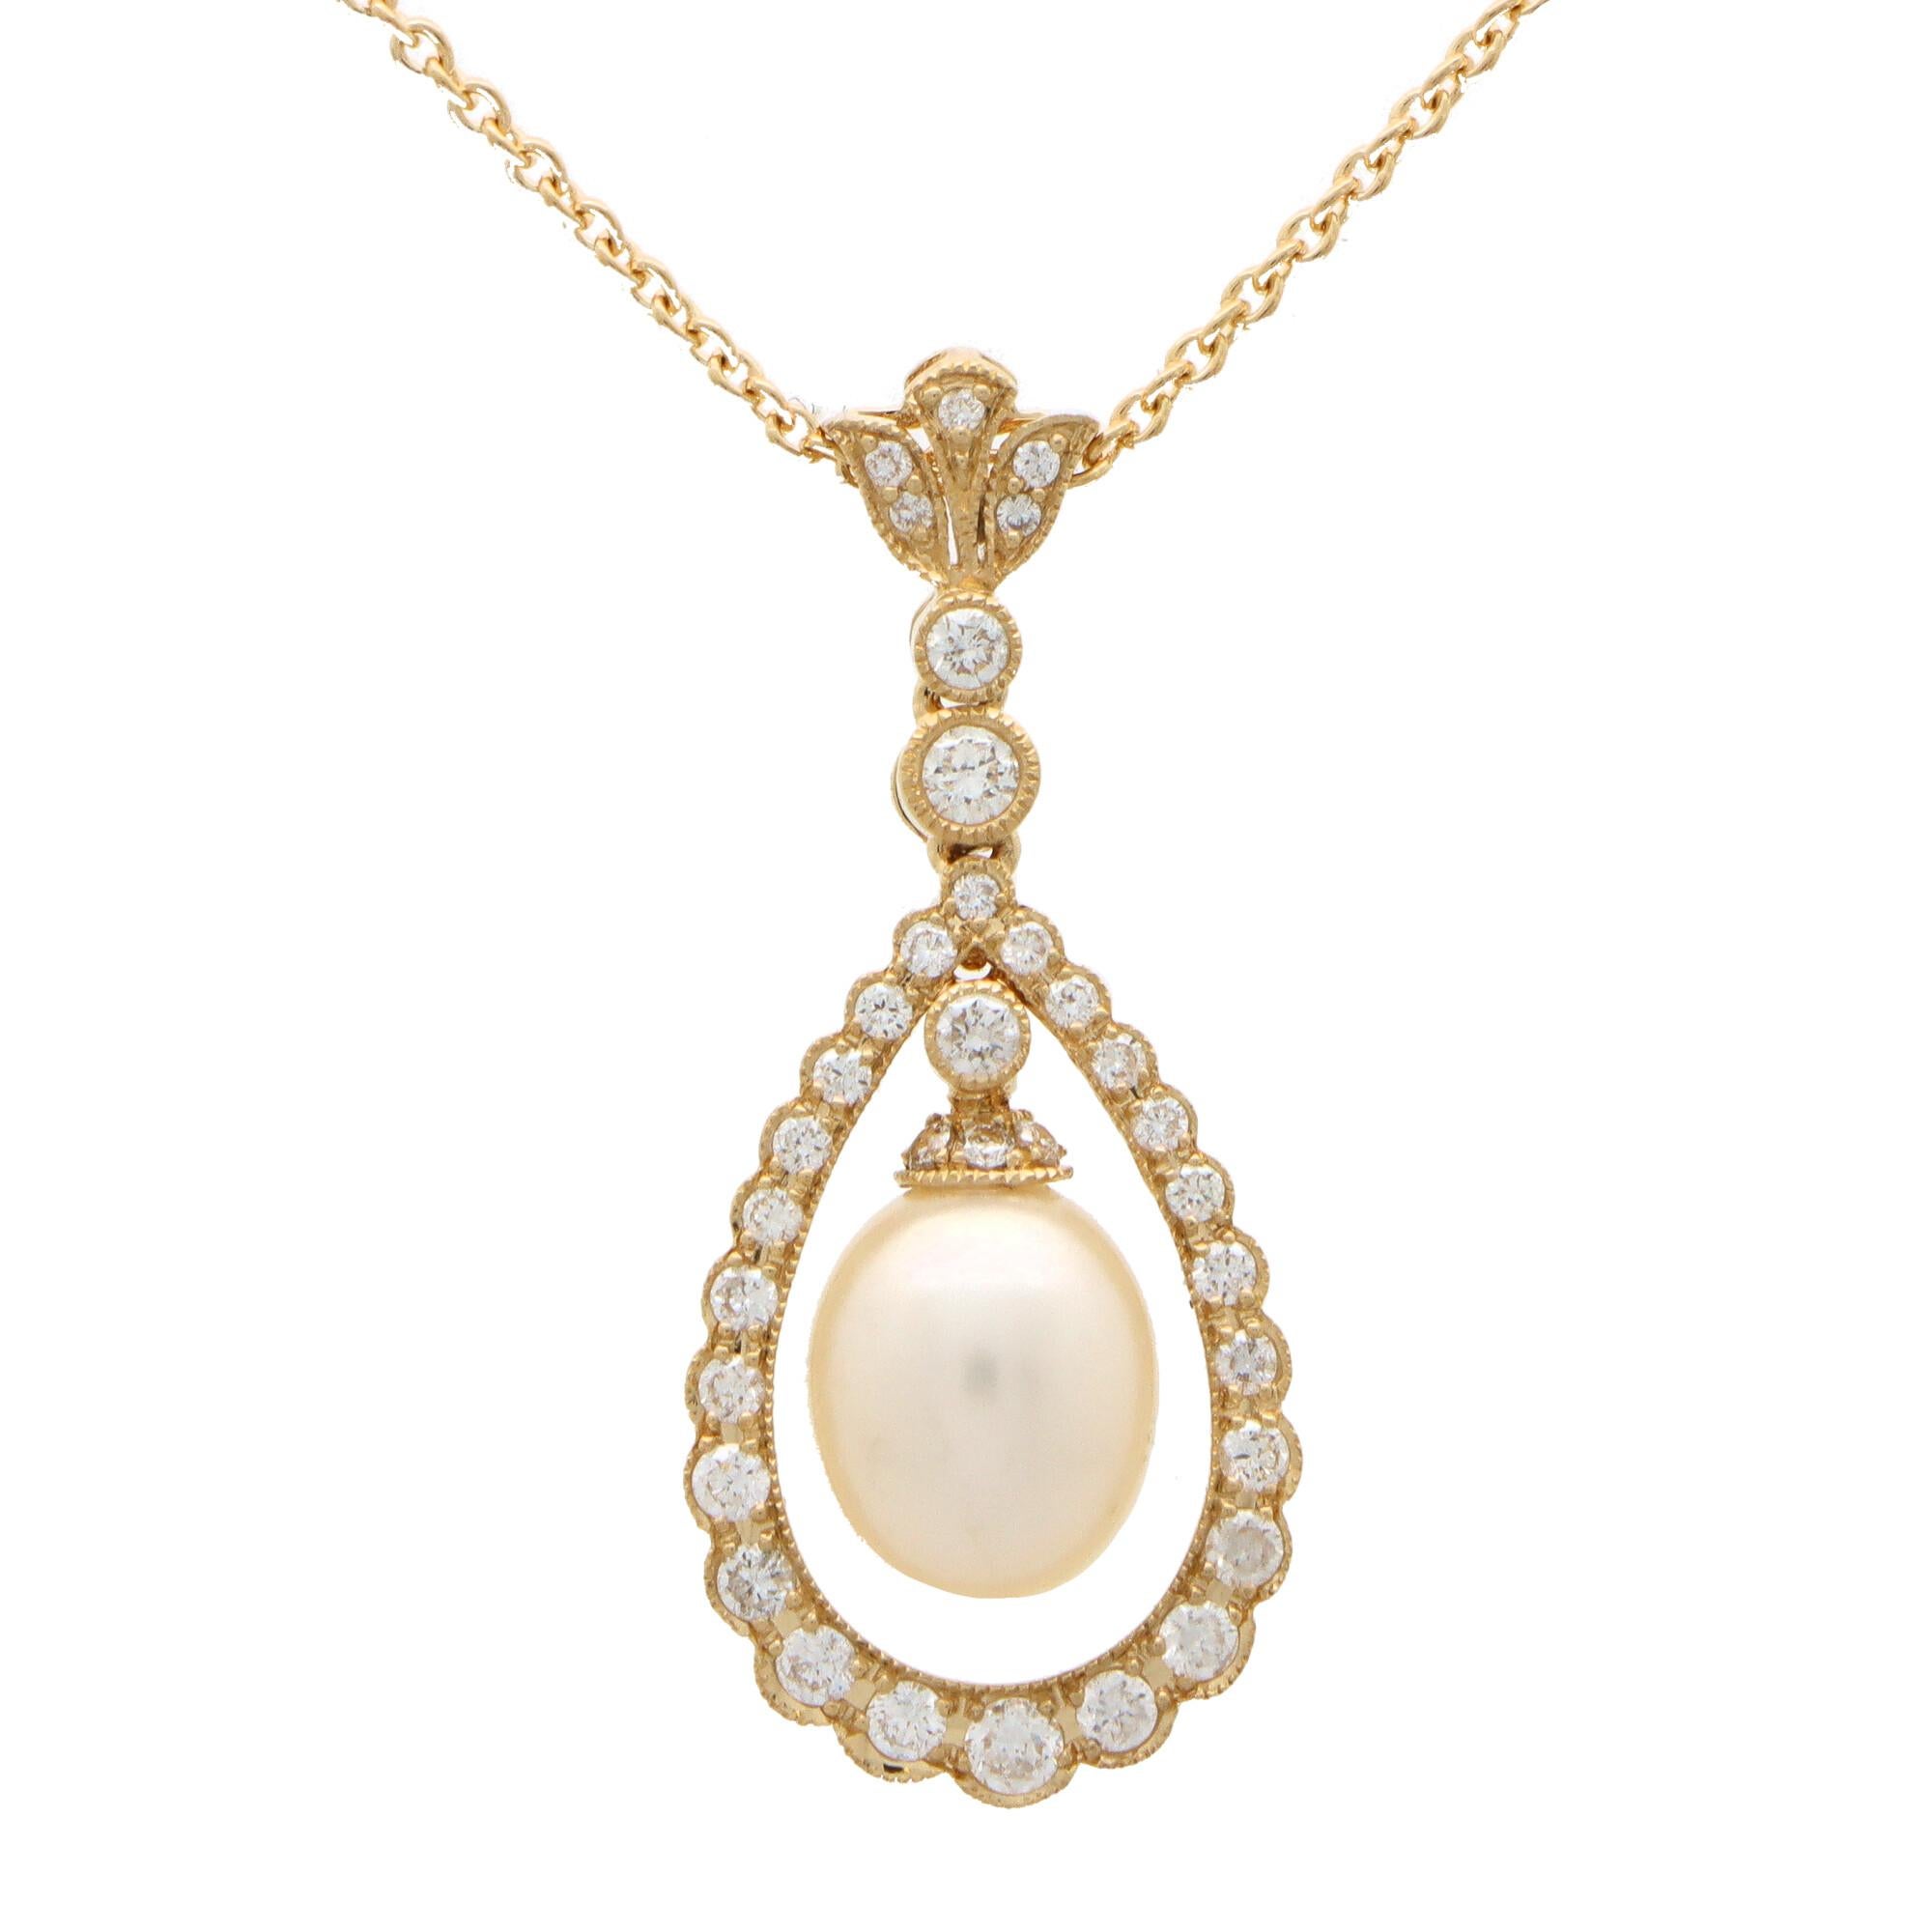  Pearl and Diamond Garland Pendant Necklace Set in 18k Yellow Gold In Excellent Condition For Sale In London, GB